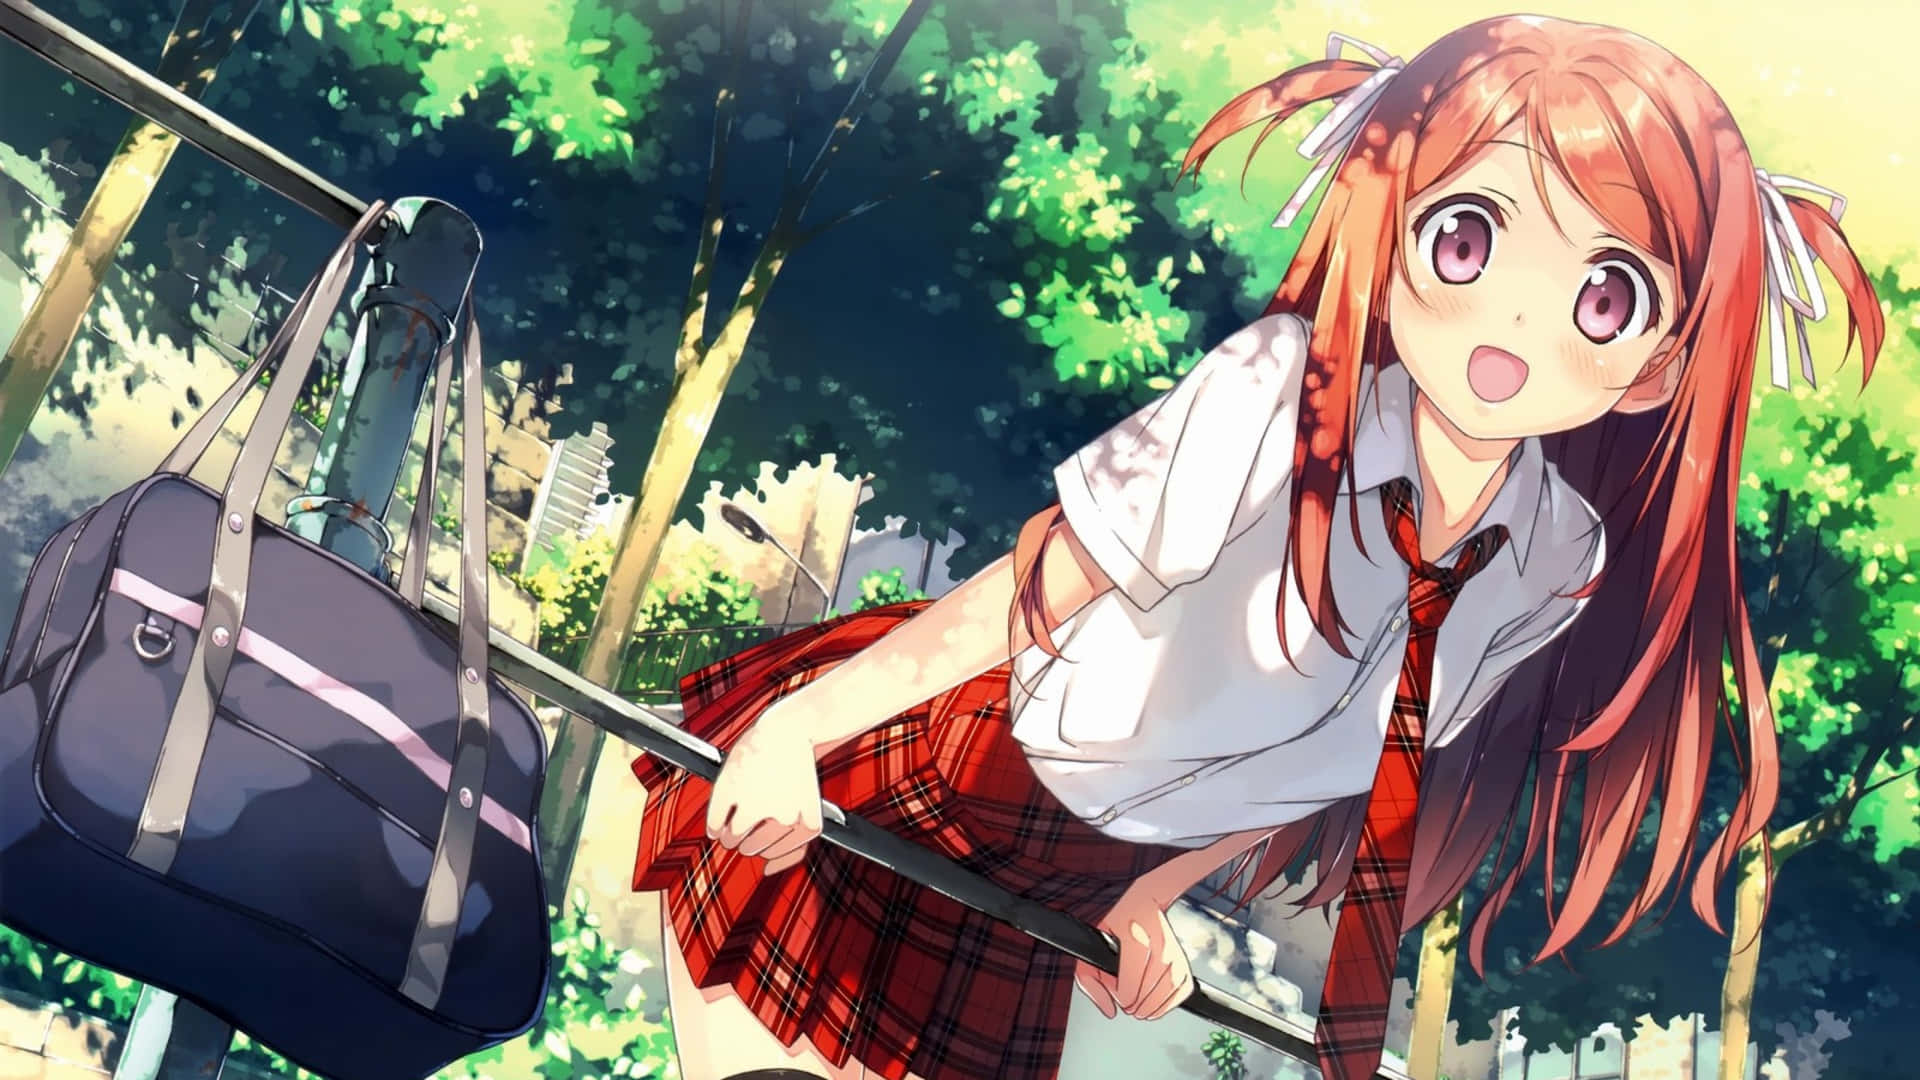 An anime girl in a field of flowers